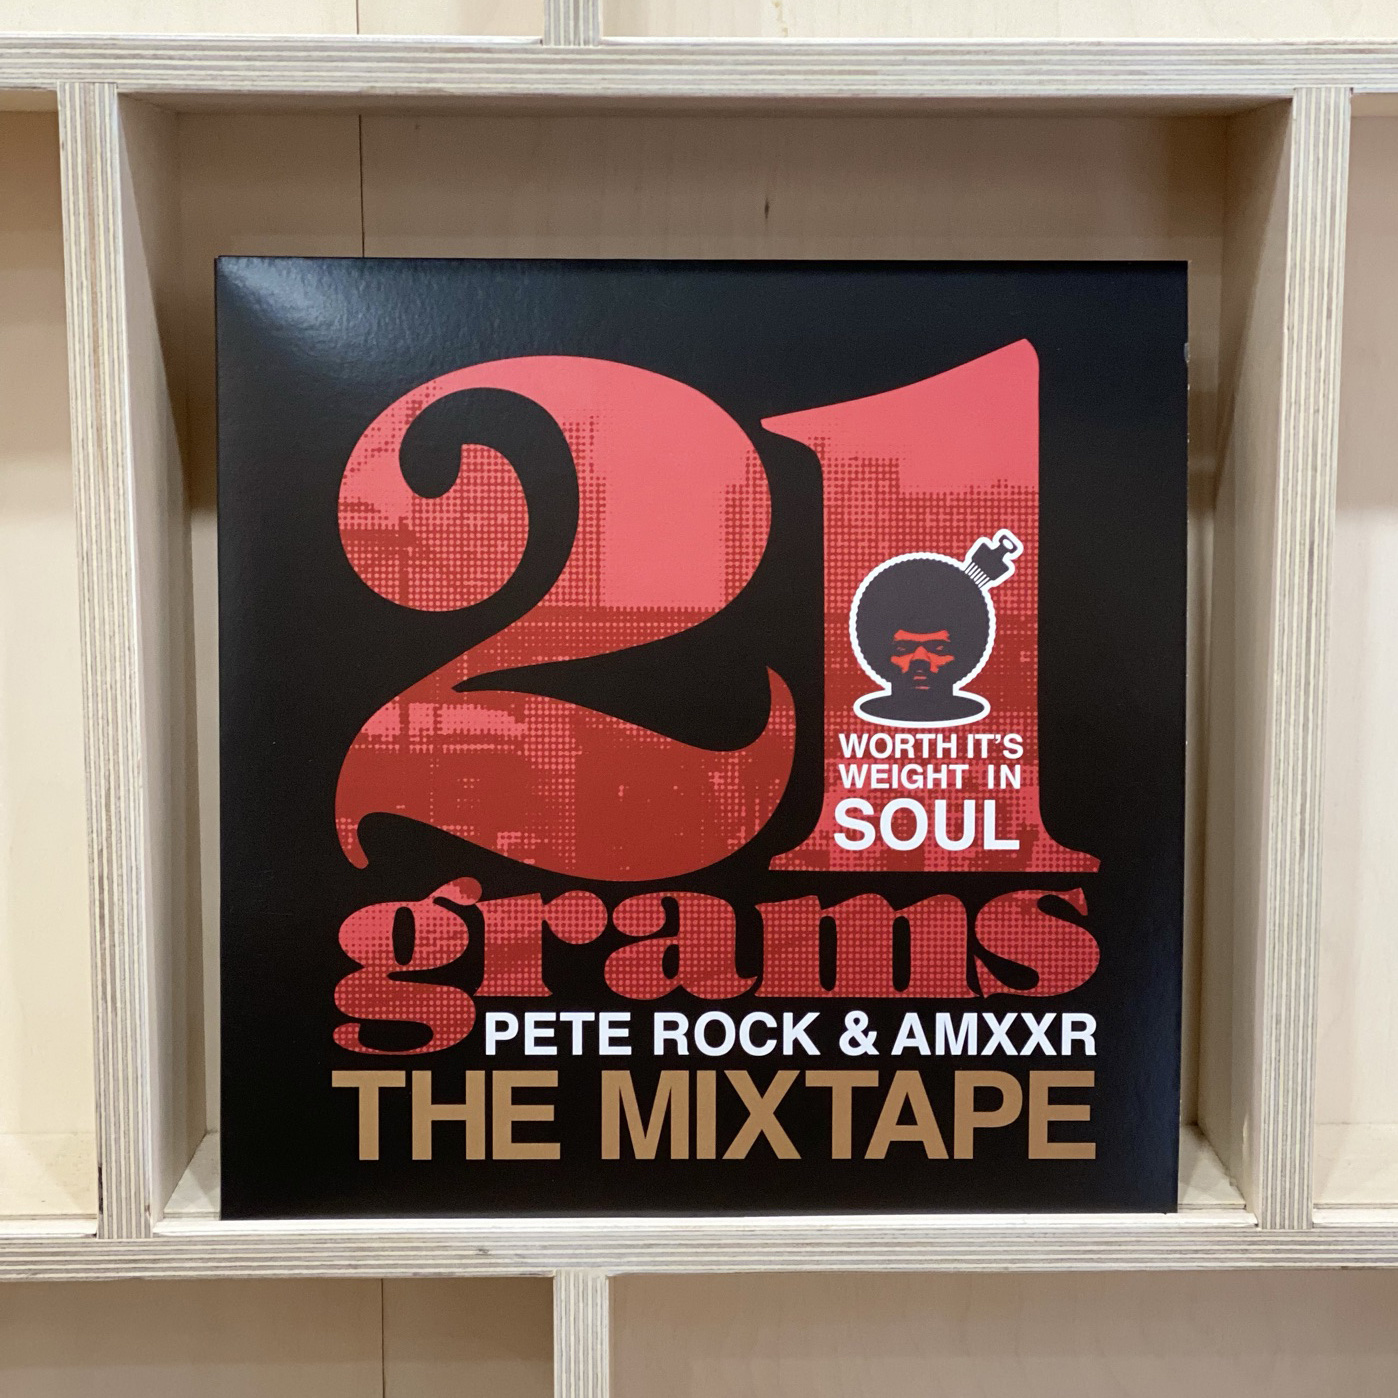 Pete Rock, AMXXR - 21 Grams: Worth It's Weight In Soul (The Mixtape) - Vinyl, LP, Limited Edition, Numbered, Red